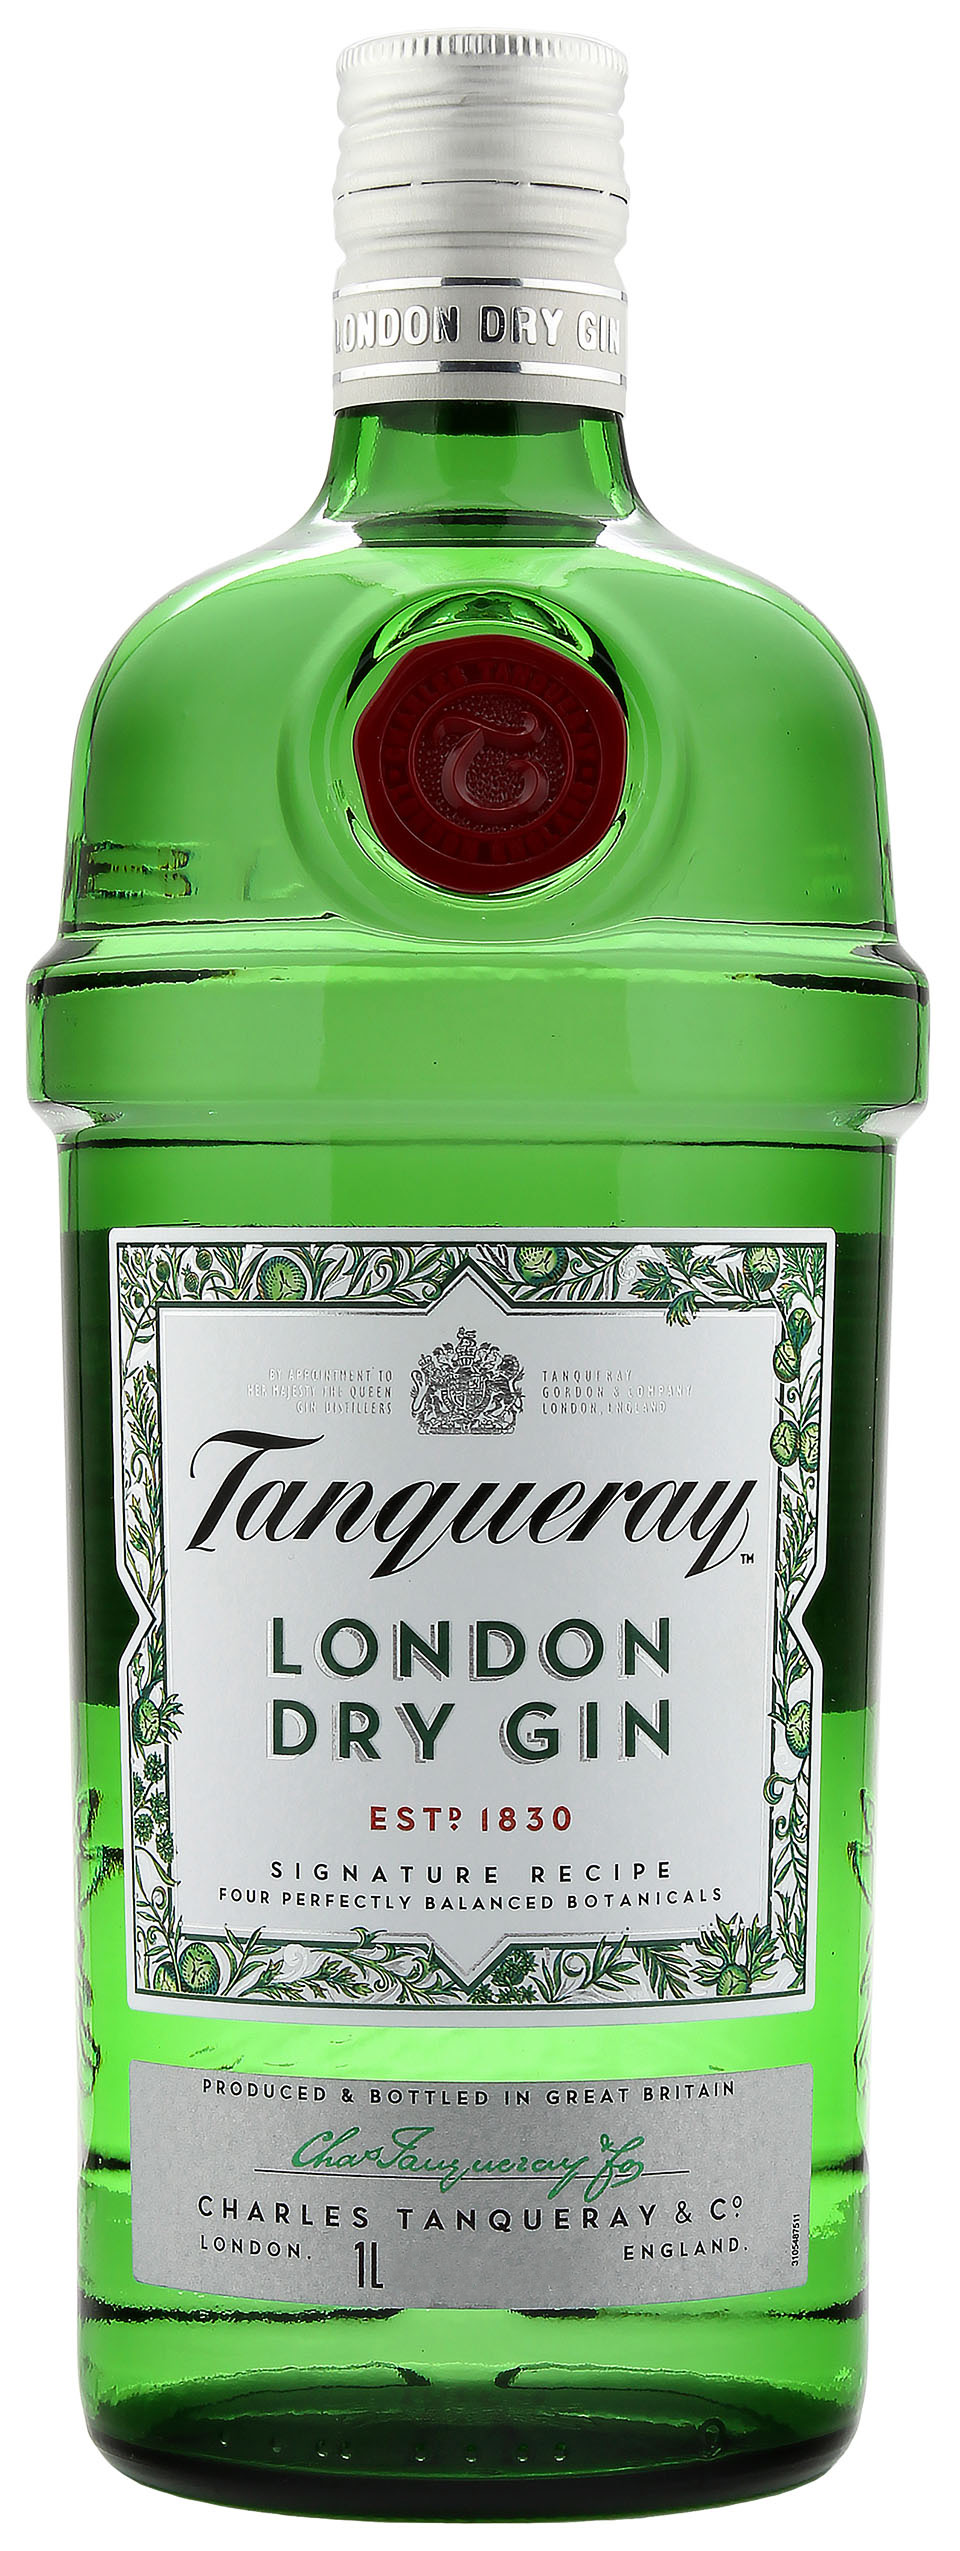 Tanqueray London Dry Gin 43.1% 1 Liter